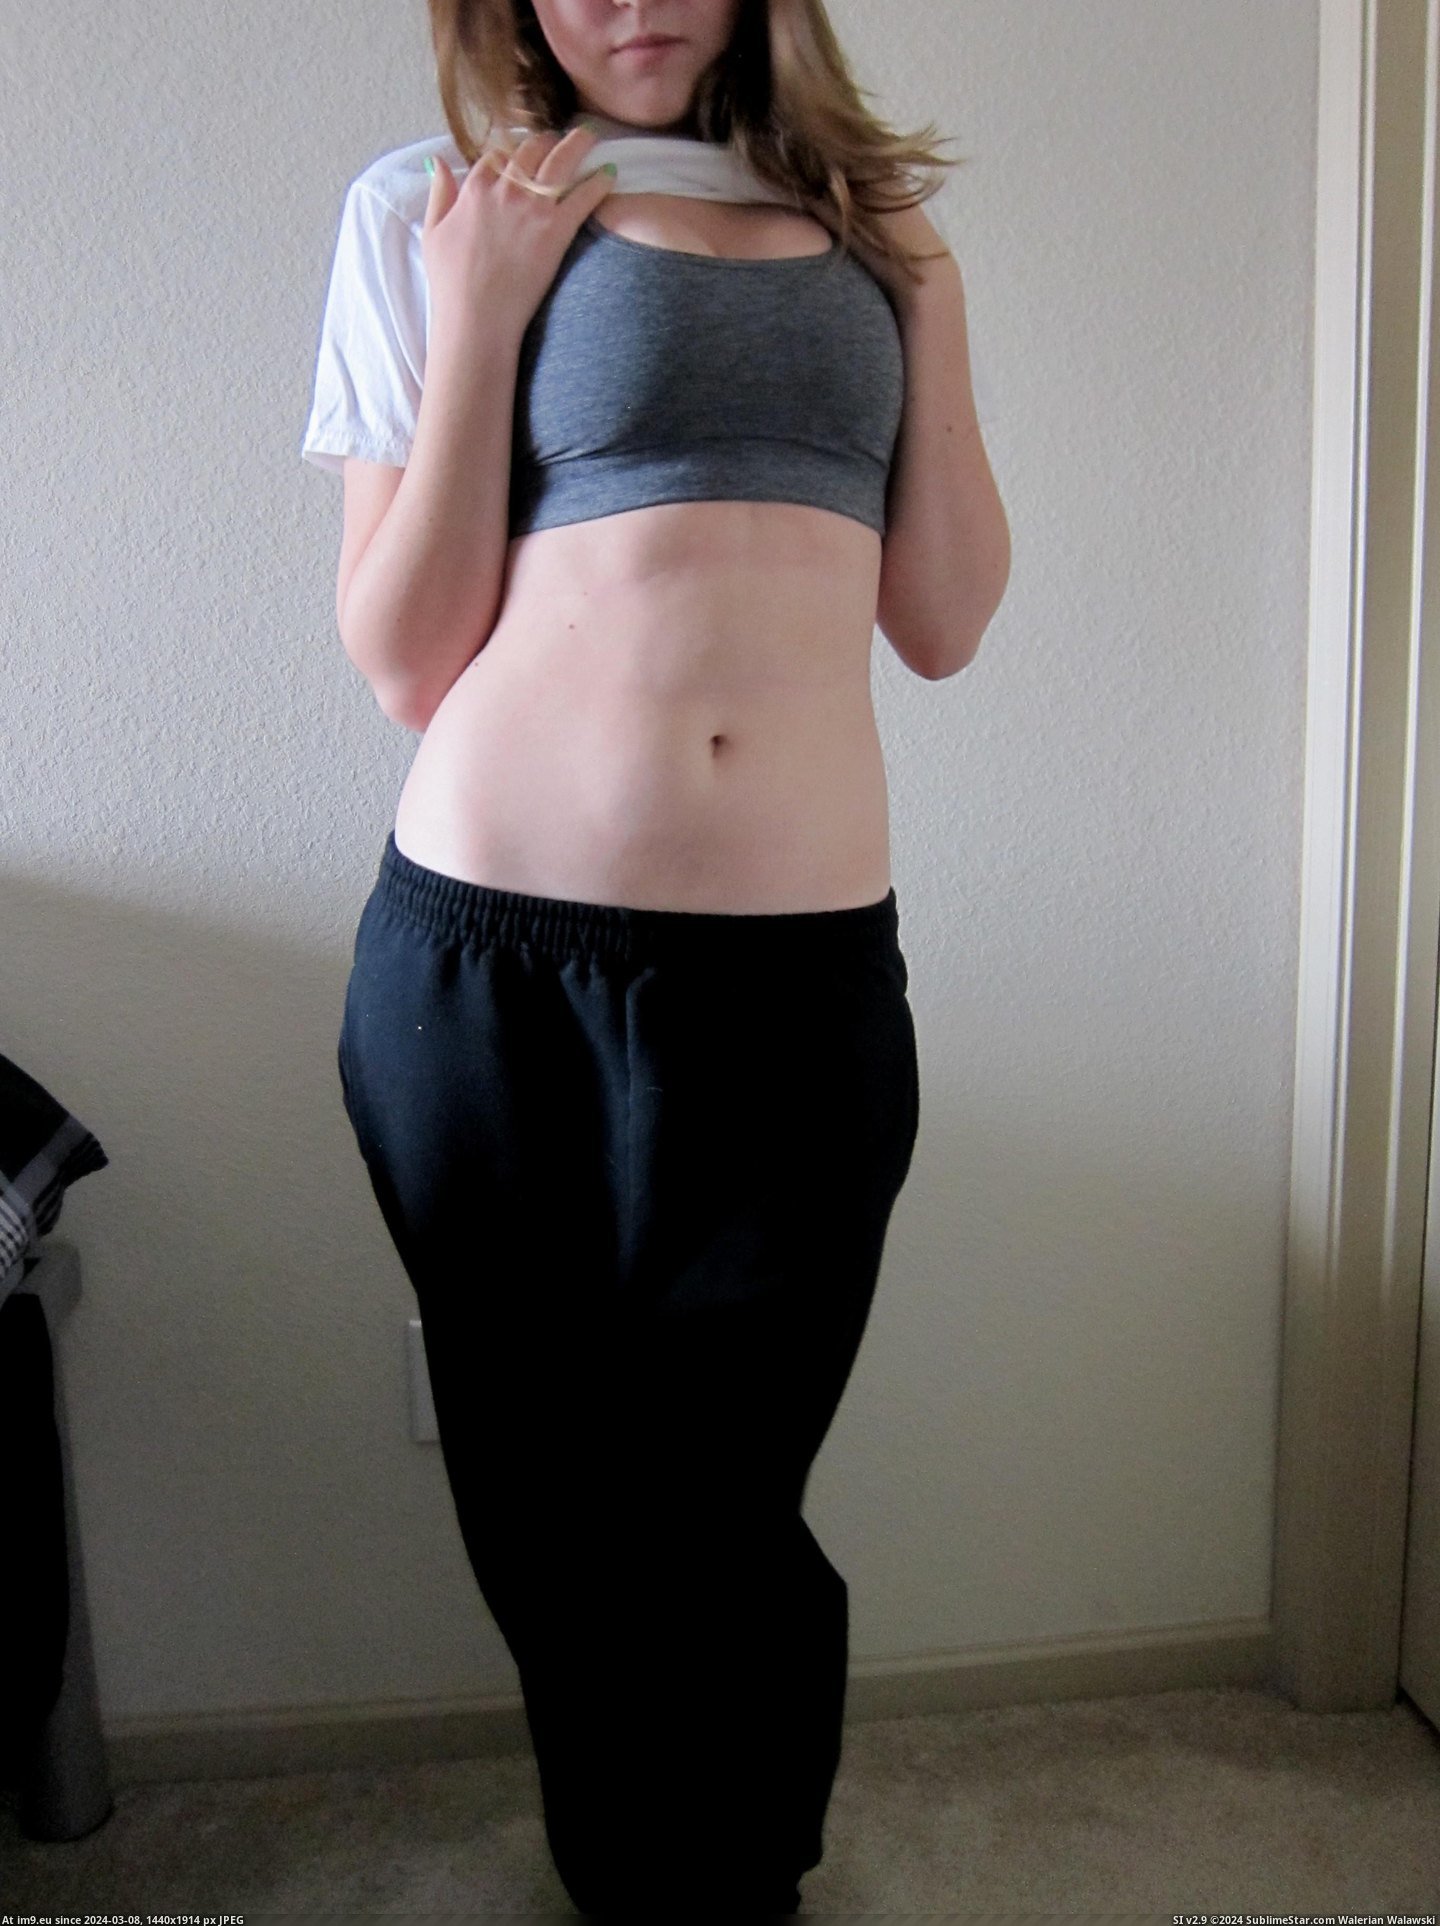 #Uck  #Sweatpants [Gonewild] [F]uck me in my sweatpants.... ;) 12 Pic. (Image of album My r/GONEWILD favs))